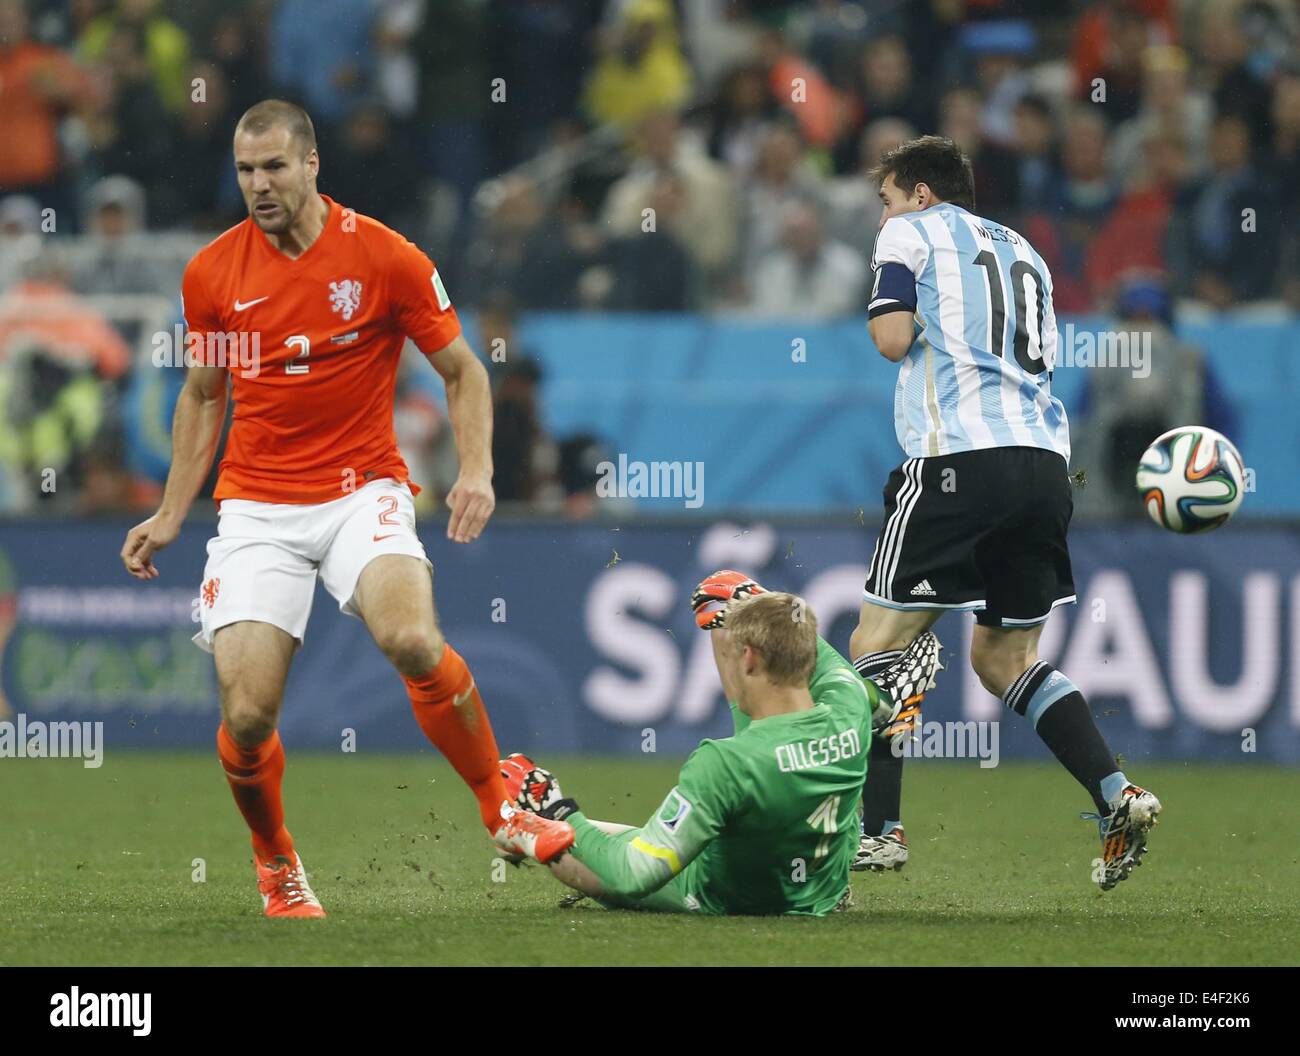 Sao Paulo, Brazil. 9th July, 2014. Netherlands' Ron Vlaar (L) and goalkeeper Jasper Cillessen (C) defend against Argentina's Lionel Messi (R) during a semifinal match between Netherlands and Argentina of 2014 FIFA World Cup at the Arena de Sao Paulo Stadium in Sao Paulo, Brazil, on July 9, 2014. Credit:  Wang Lili/Xinhua/Alamy Live News Stock Photo